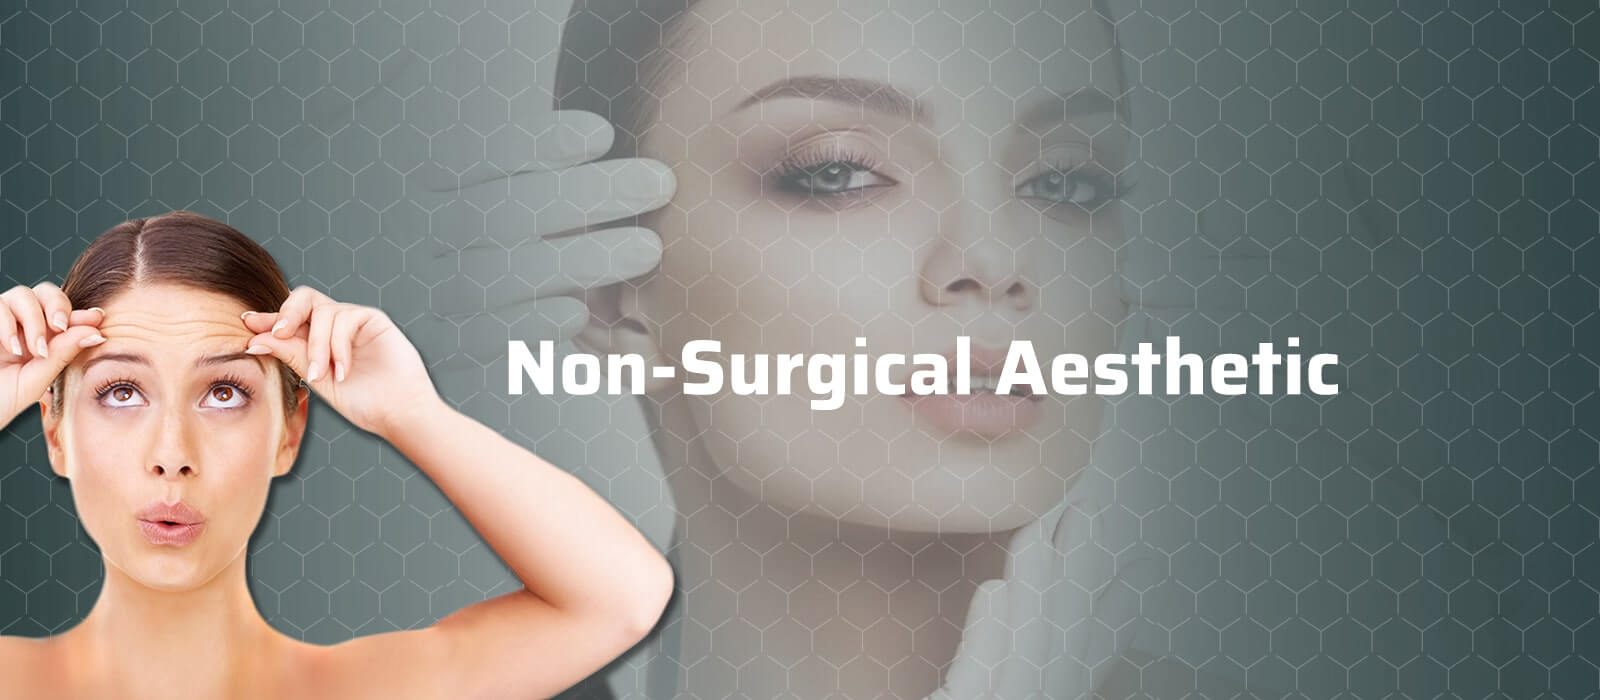 Non-Surgical Aesthetic